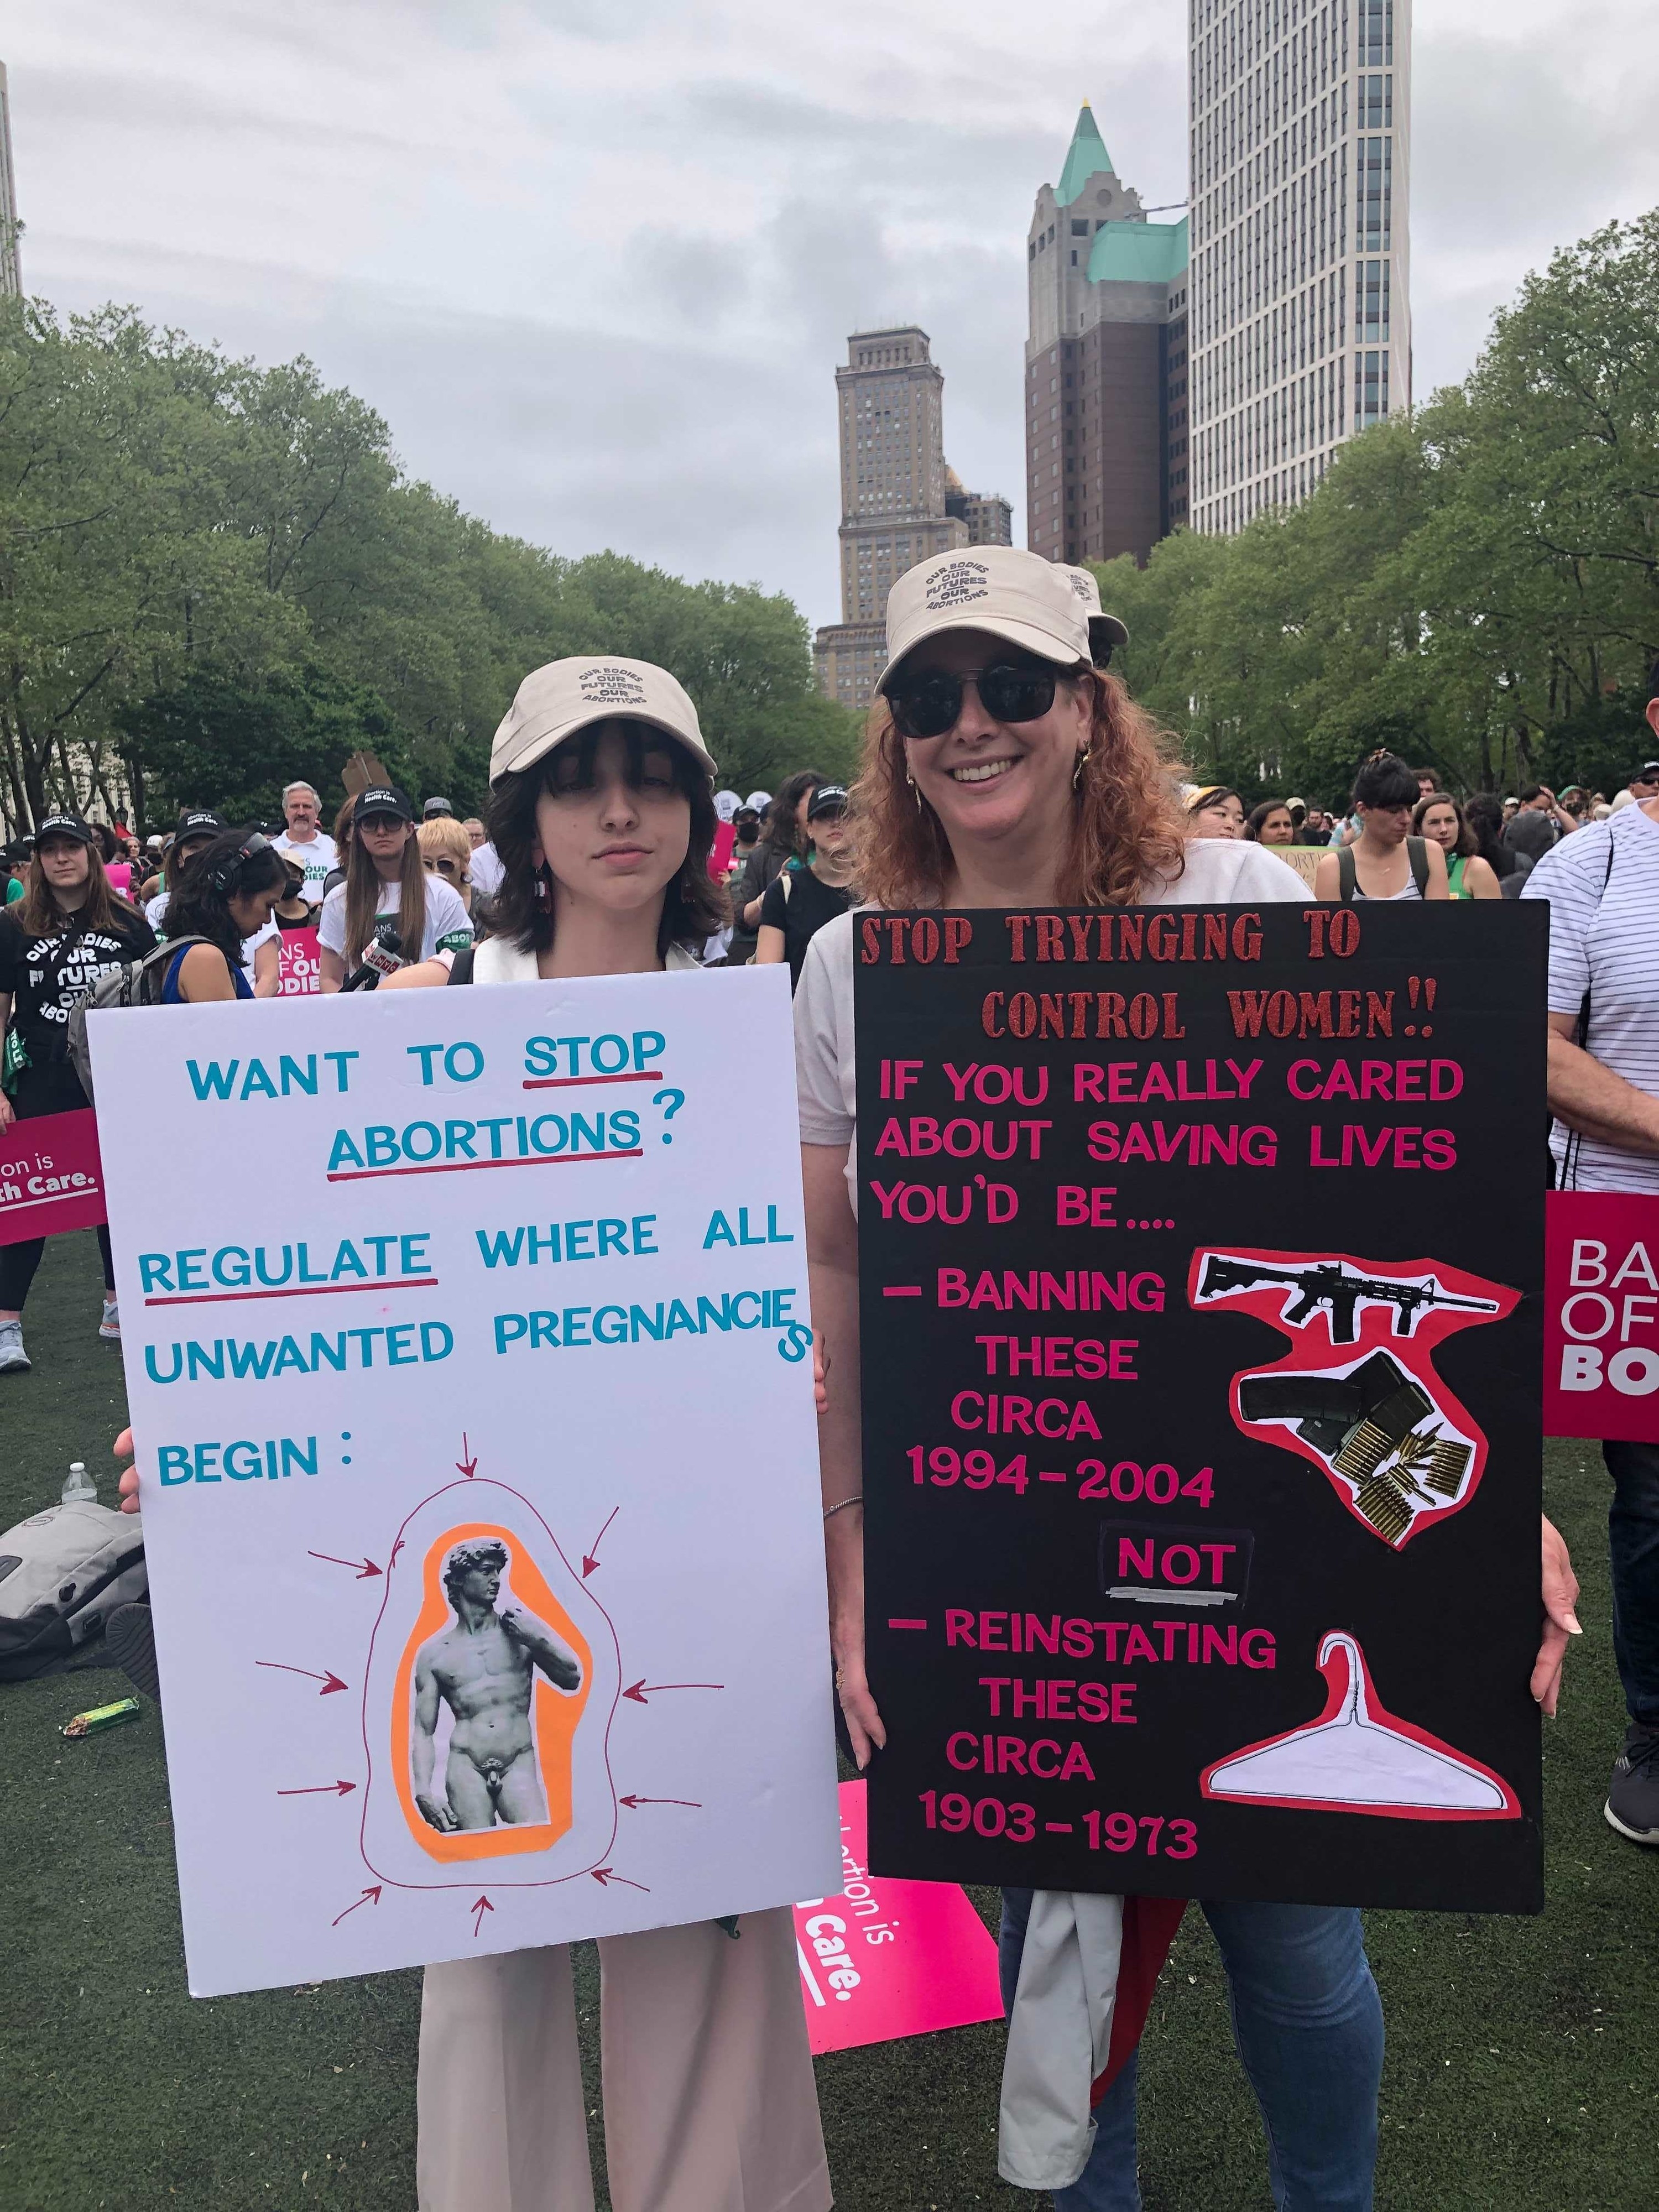 &quot;Want to stop abortions? Regulate where all wanted pregnancies begin:&quot; with sign pointing to a penis, and &quot;If you really cared about saving lives you&#x27;d be banning these [guns] circa 1994–2004, not reinstating these [hangers] circa 1903–1973&quot;